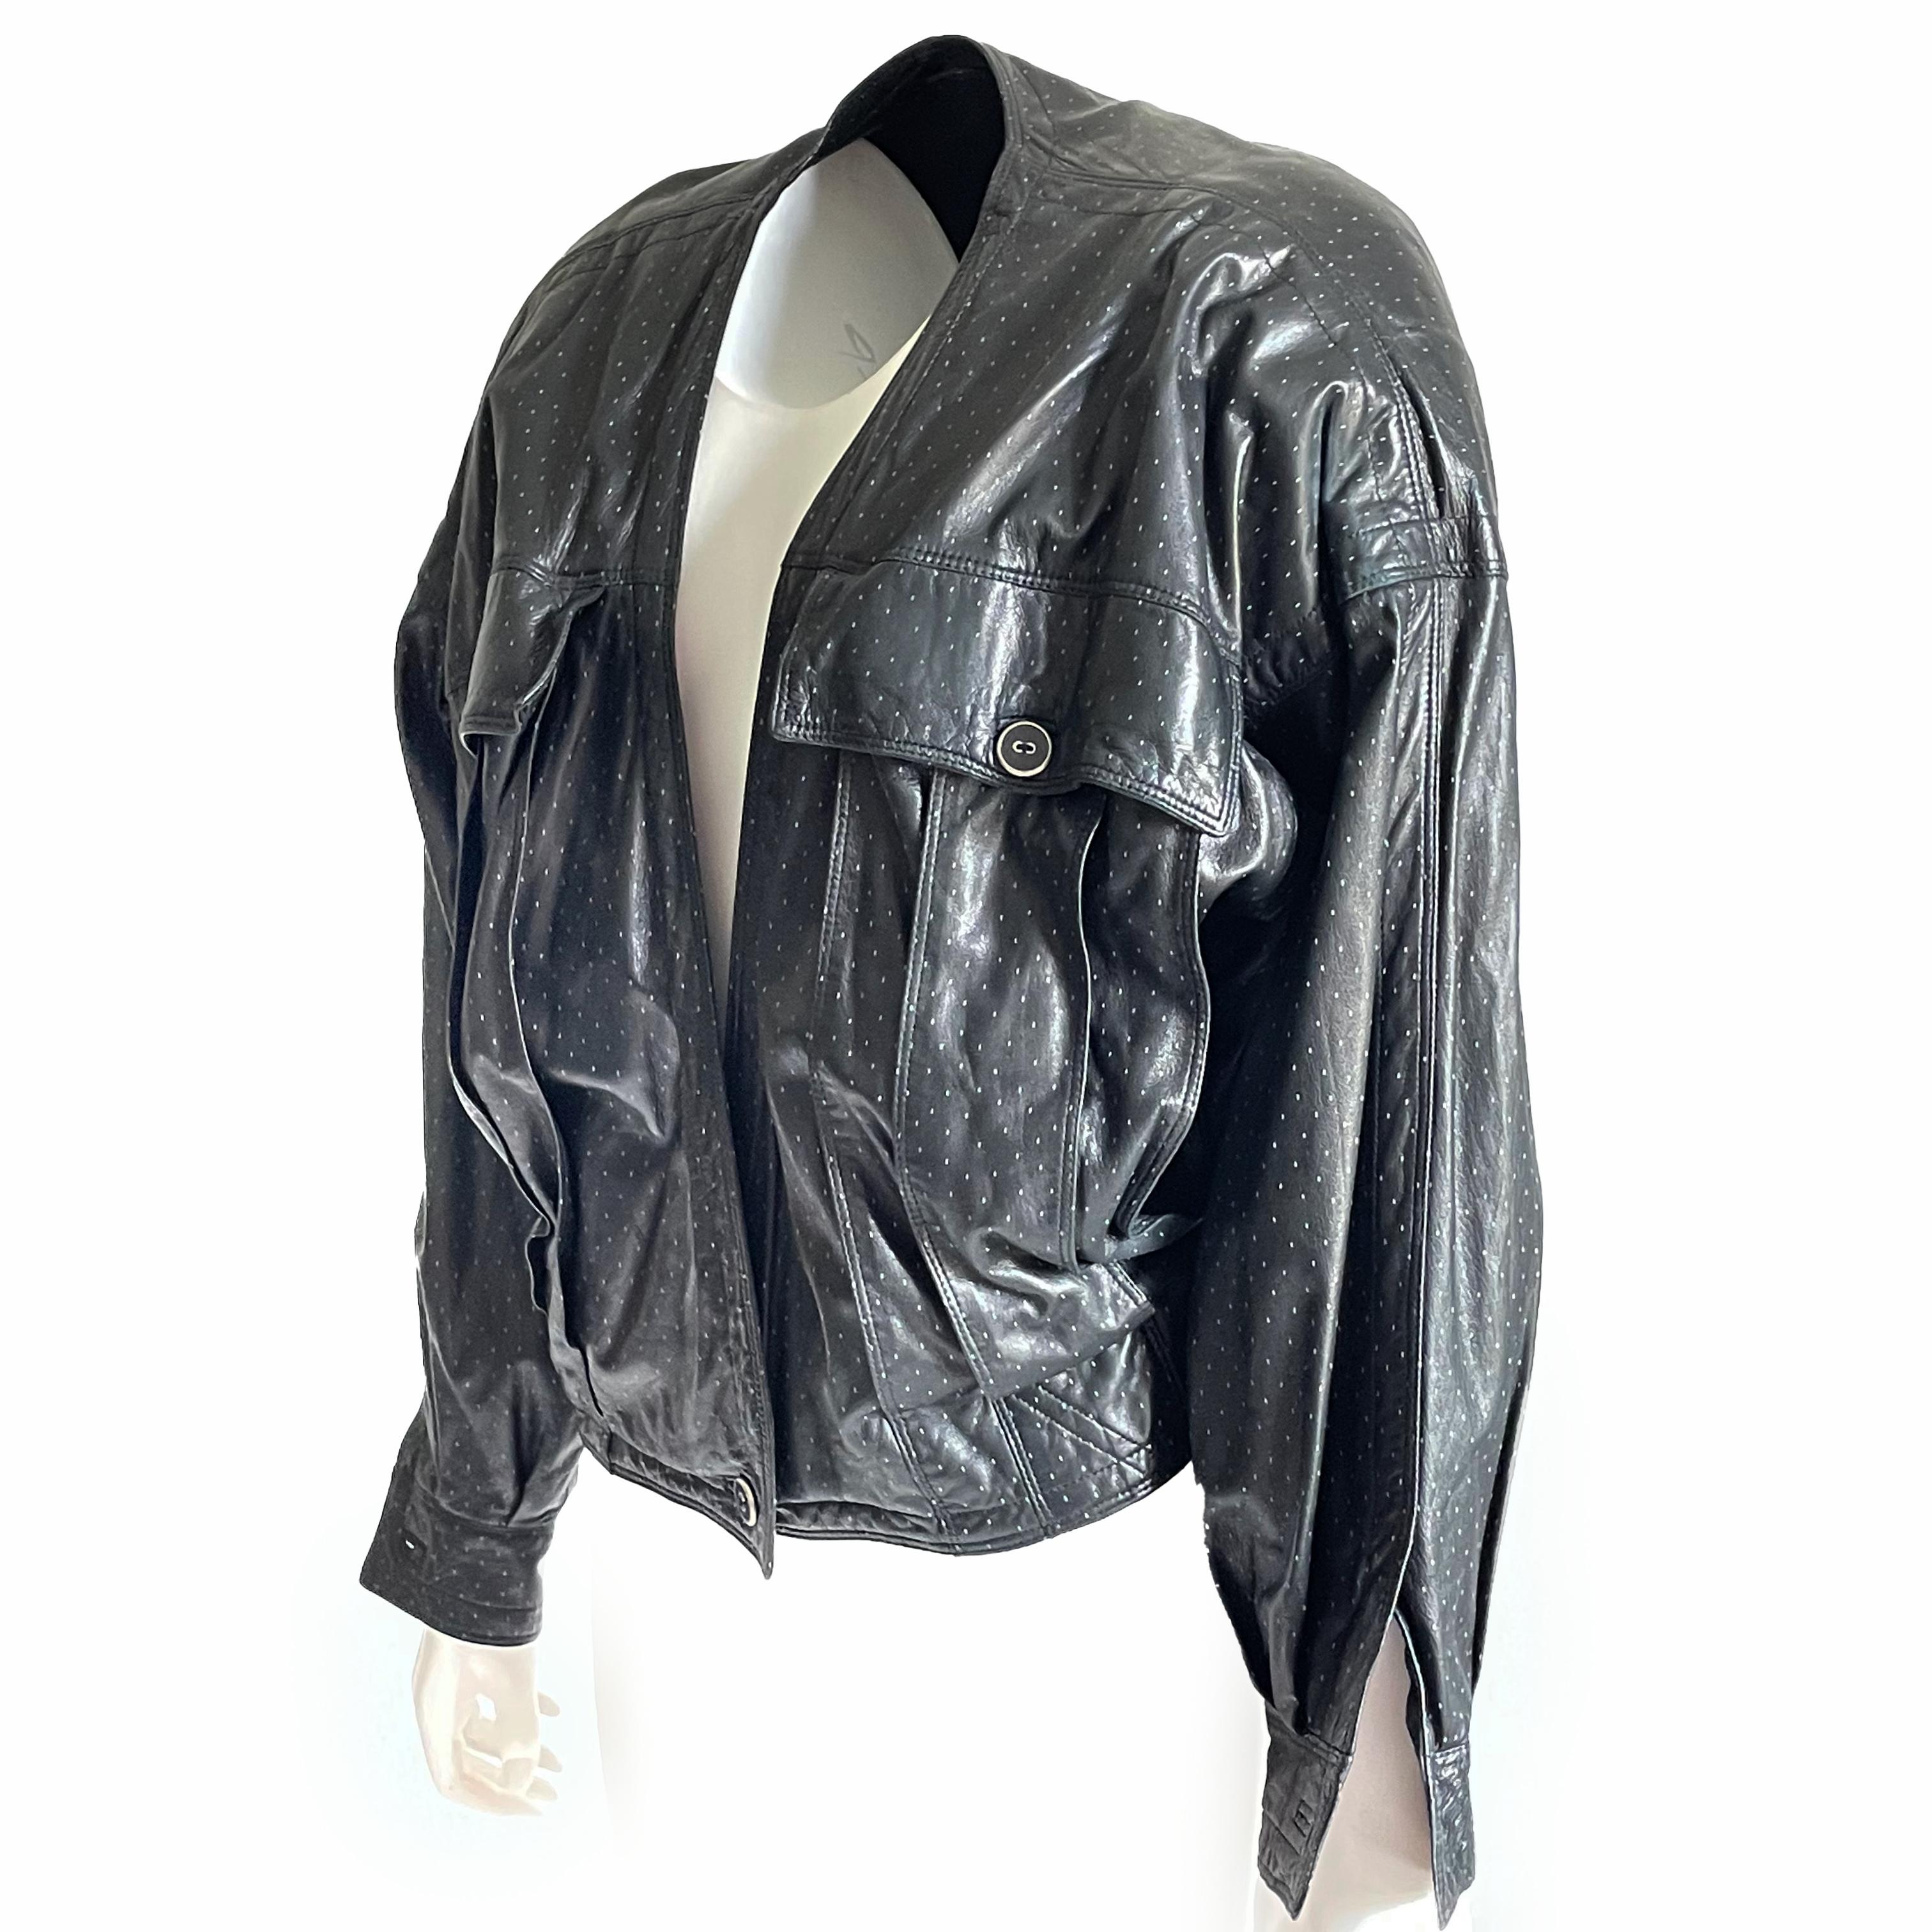 Gianni Versace Leather Bomber Jacket Black Dotted Lambskin Size M Early 90s  For Sale 1